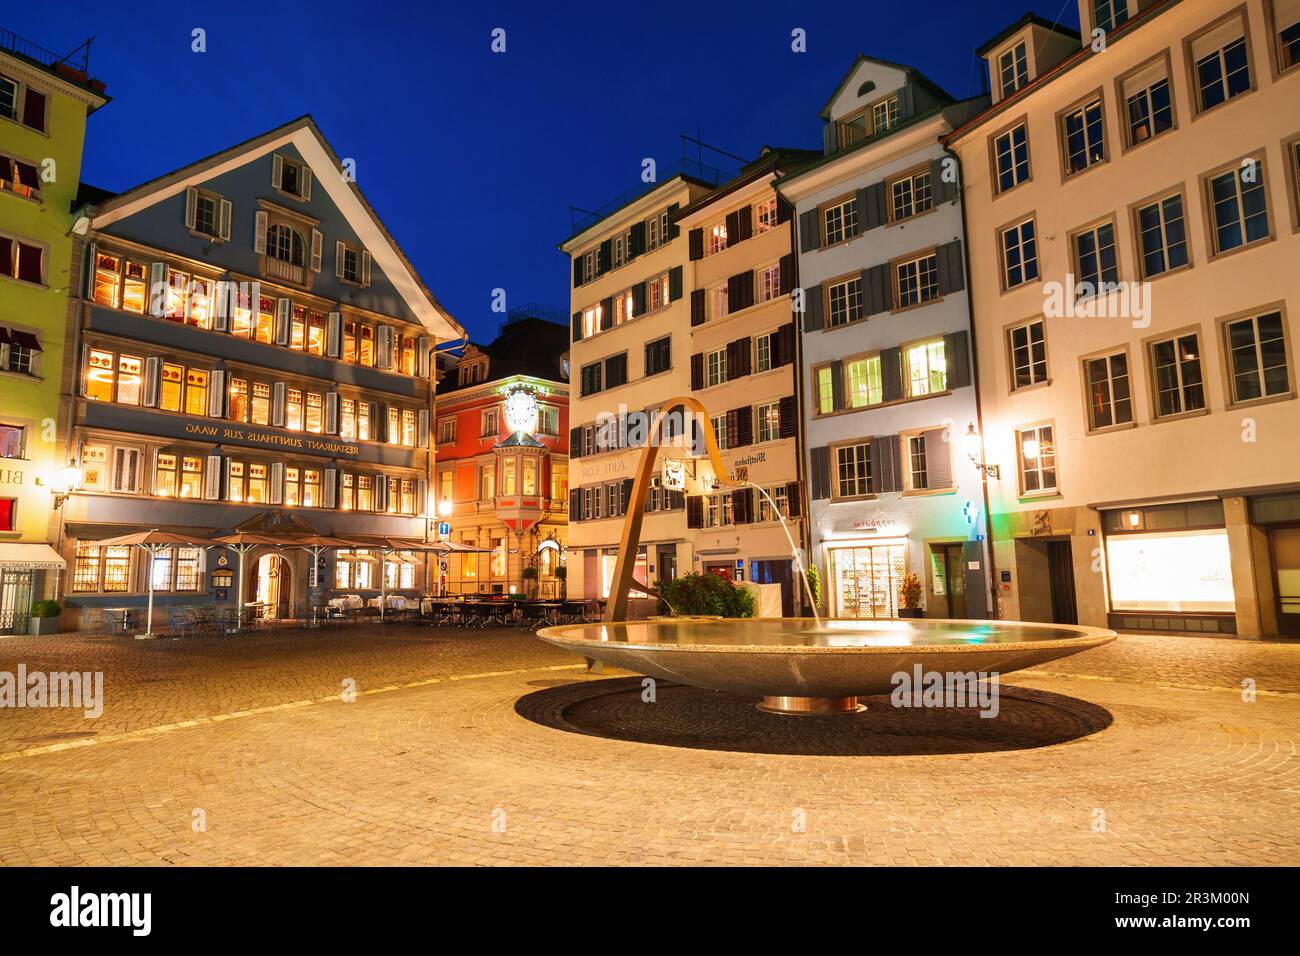 ZURICH, SWITZERLAND - JULY 08, 2019: Colorful houses at the Munsterhof main square in the centre of Zurich city in Switzerland Stock Photo